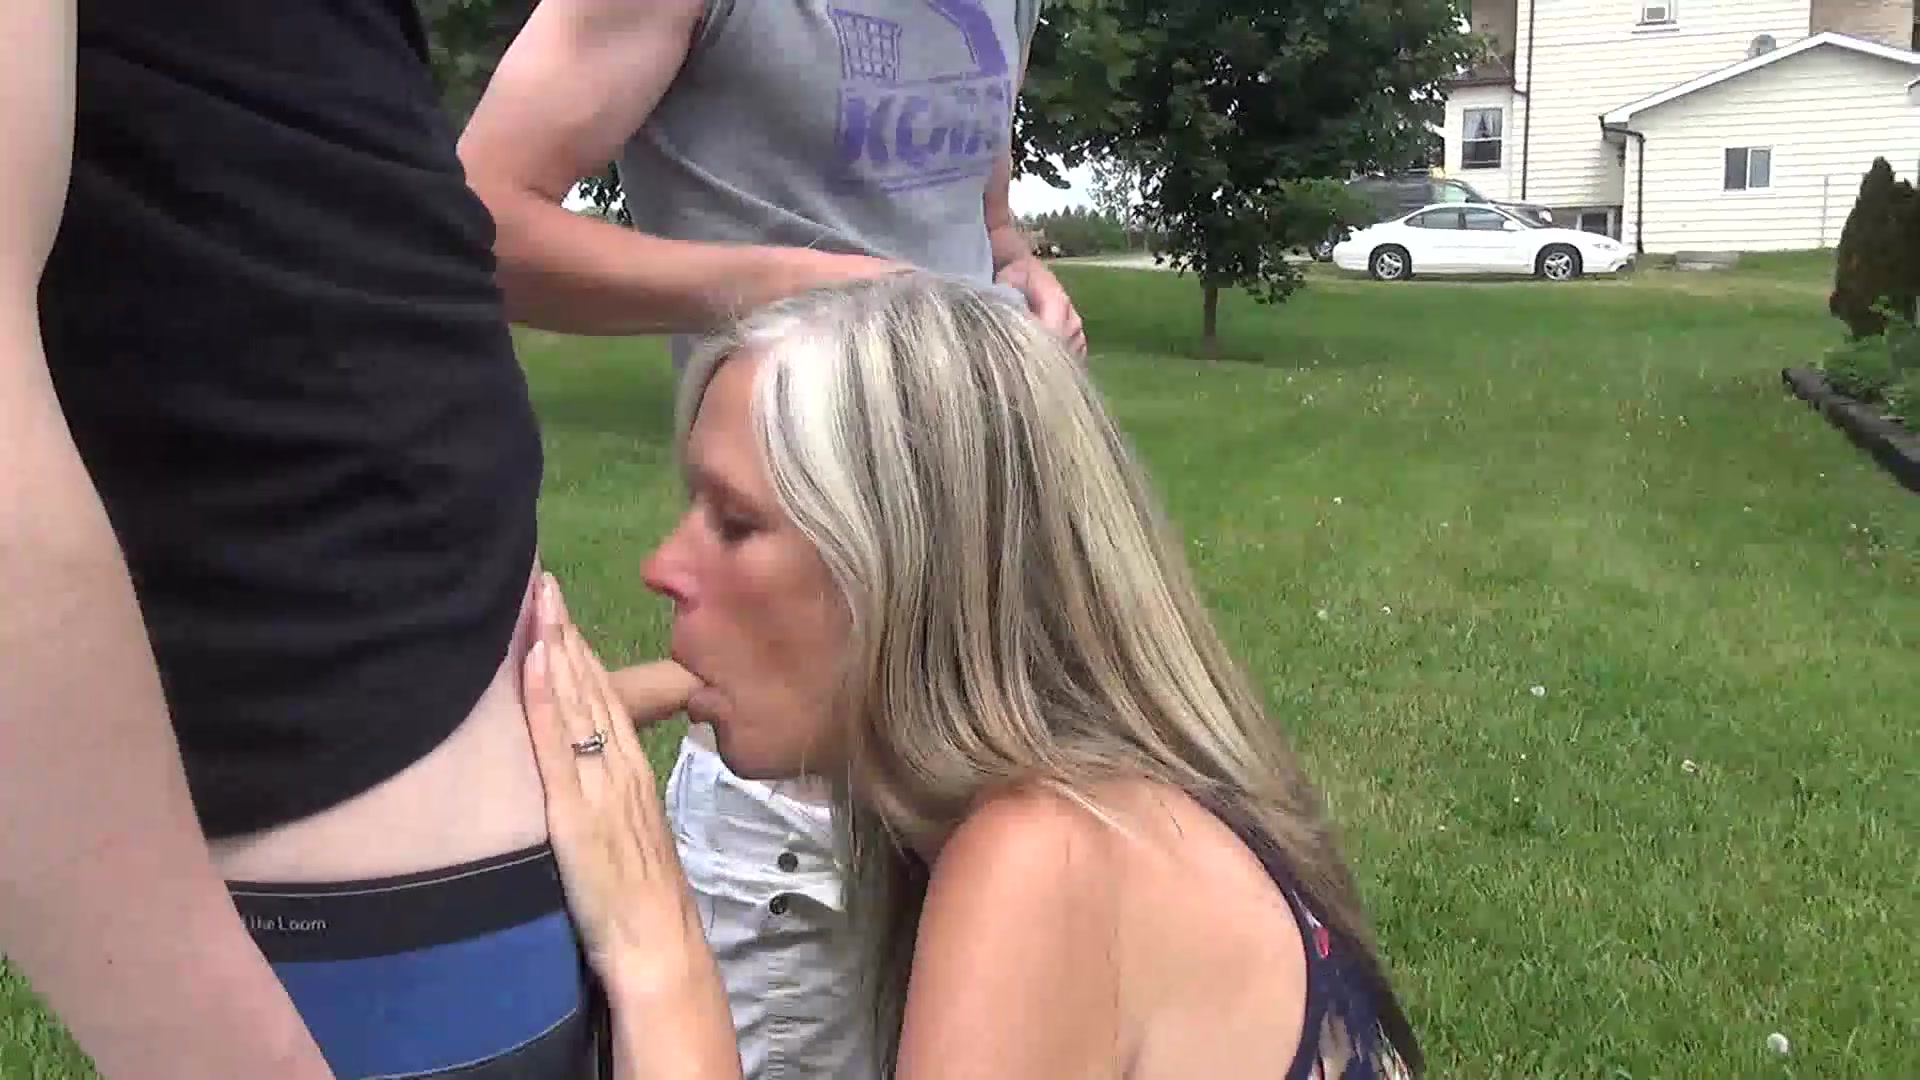 denise bicknell recommends mom rewards son with blowjob pic